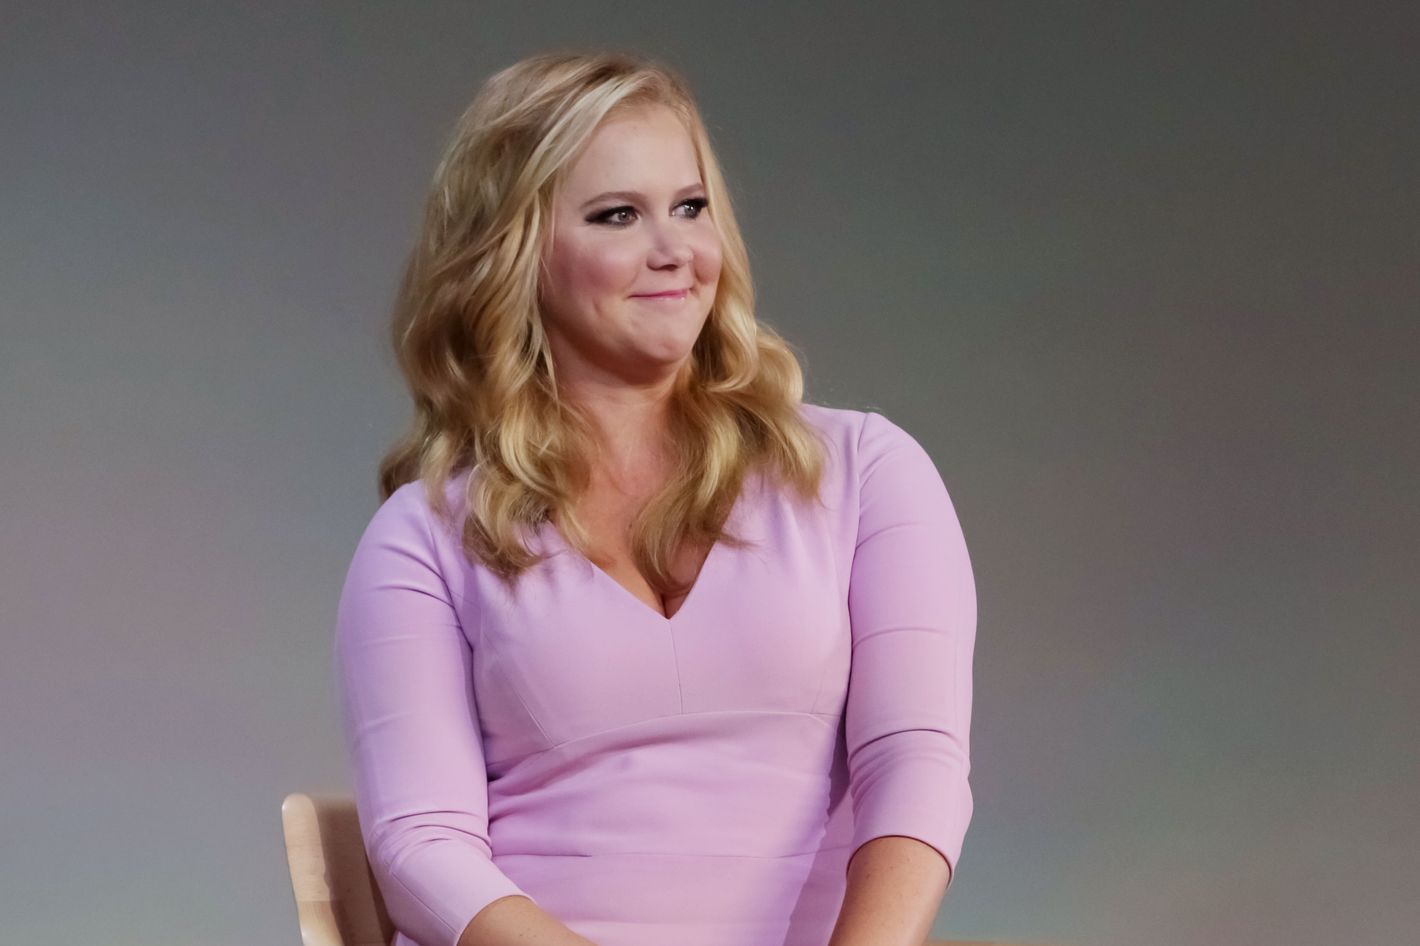 Beautiful Teen Fucked To Orgasm - Amy Schumer's First Sex Scene Involved 'Scream-Crying and Drooling'